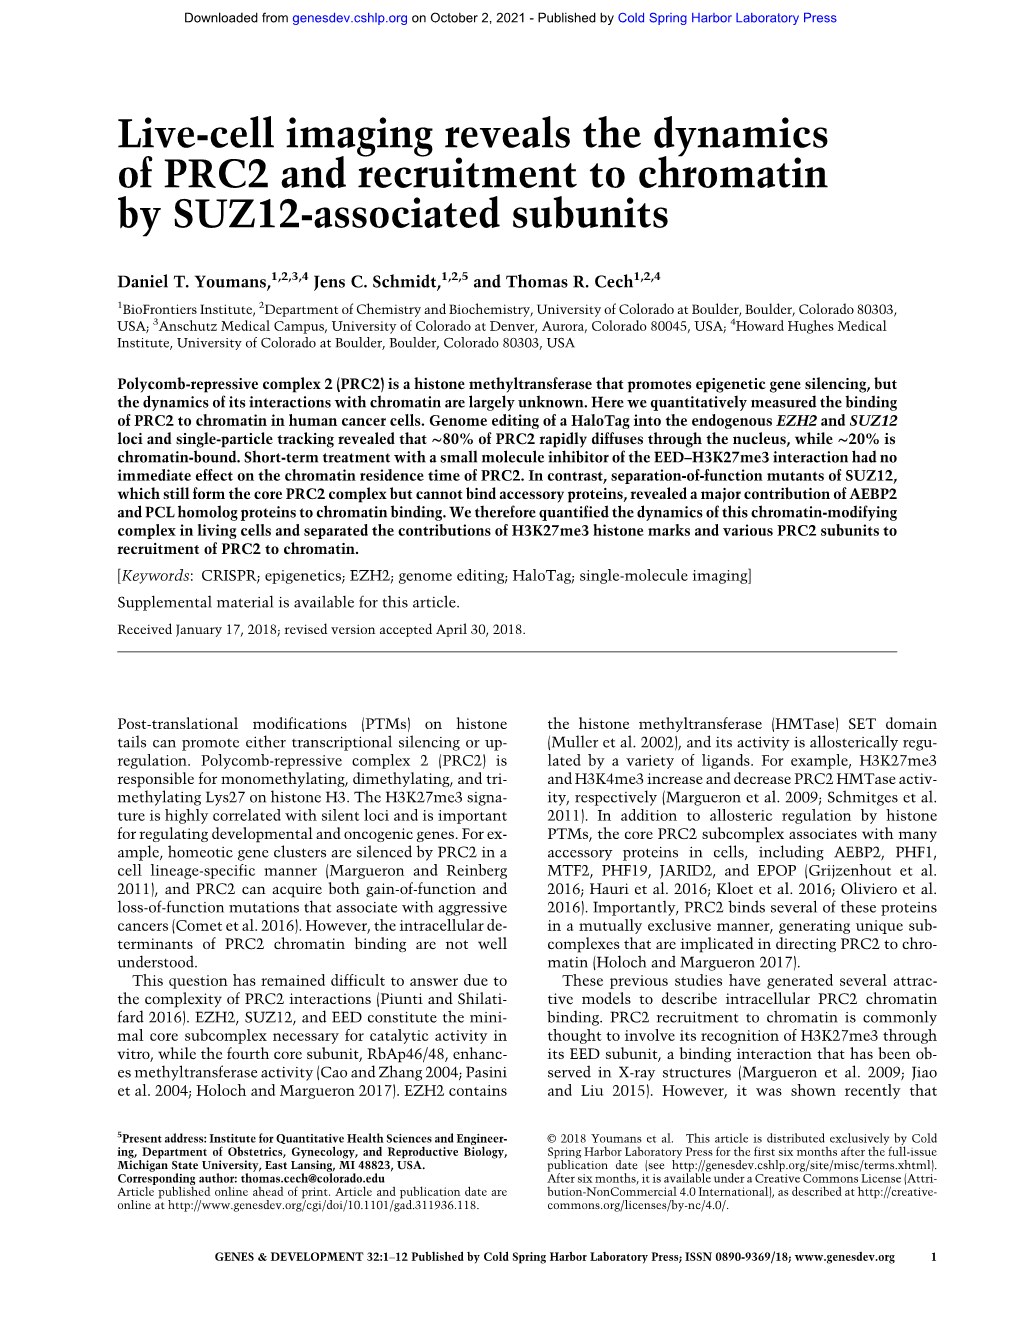 Live-Cell Imaging Reveals the Dynamics of PRC2 and Recruitment to Chromatin by SUZ12-Associated Subunits